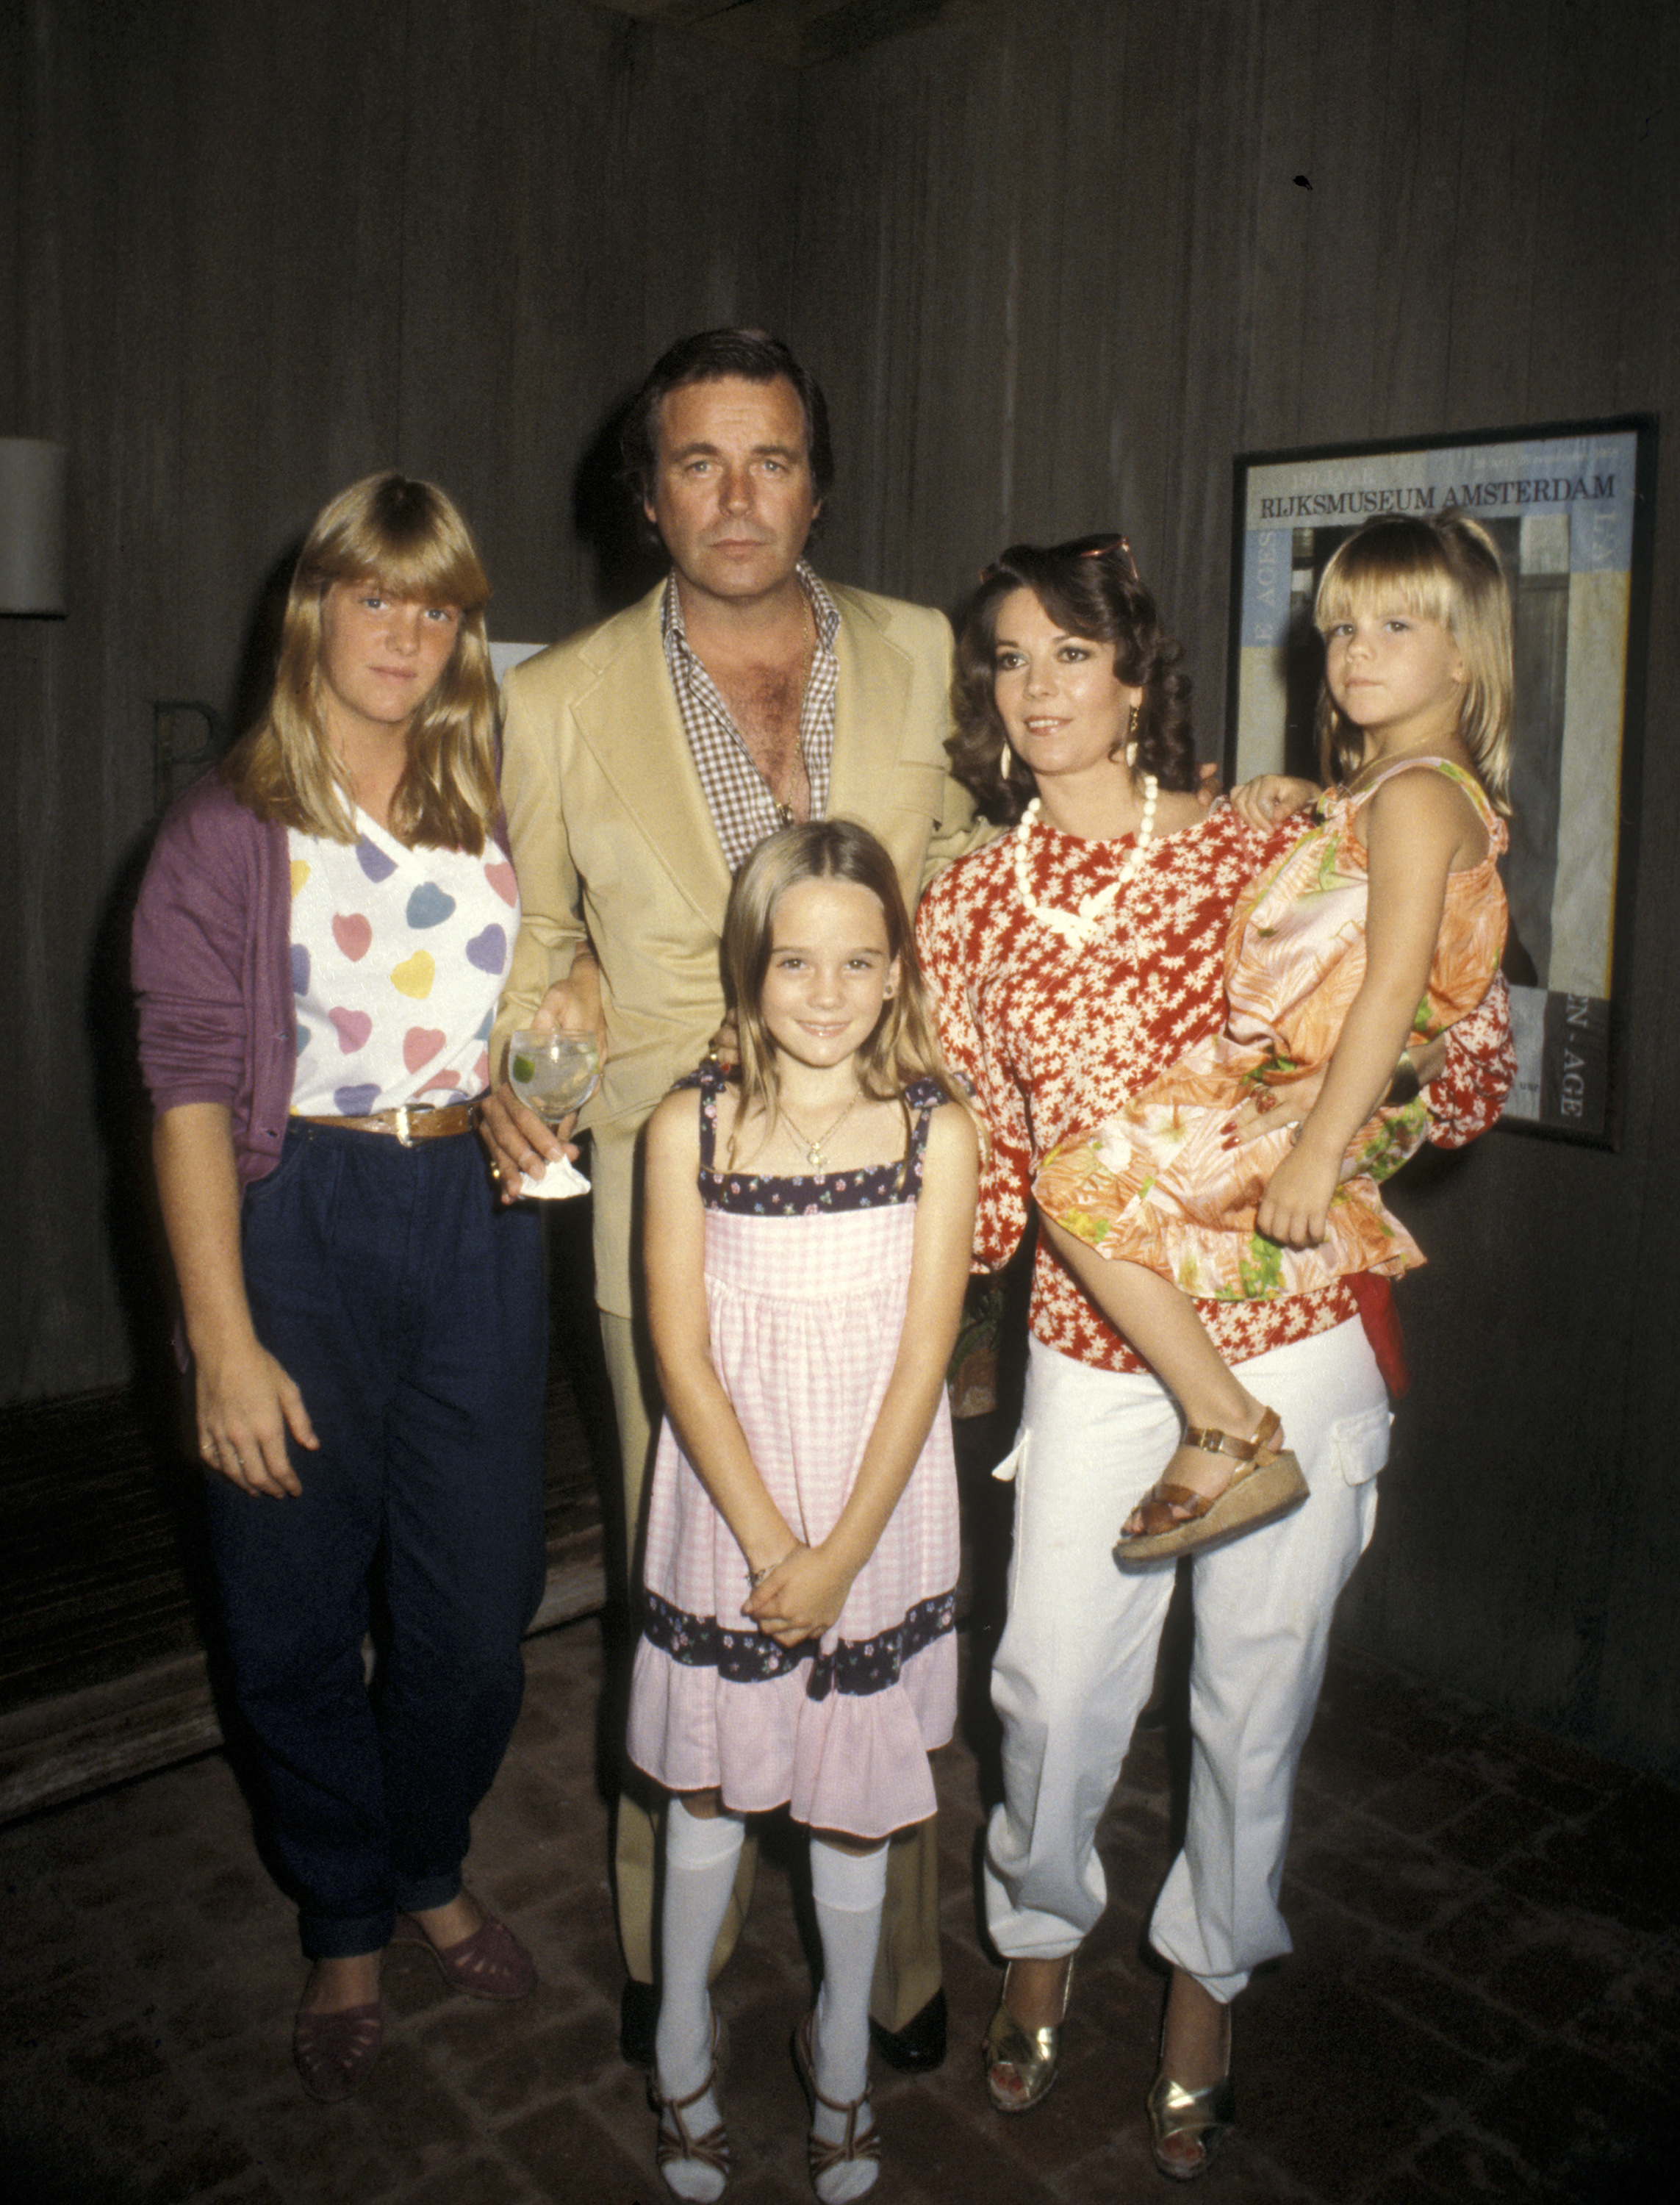 Robert Wagner, Natalie Wood, and Daughters Katie Wagner, Natasha Gregson Wagner, and Courtney Wagner circa 1981 | Source: Getty Images